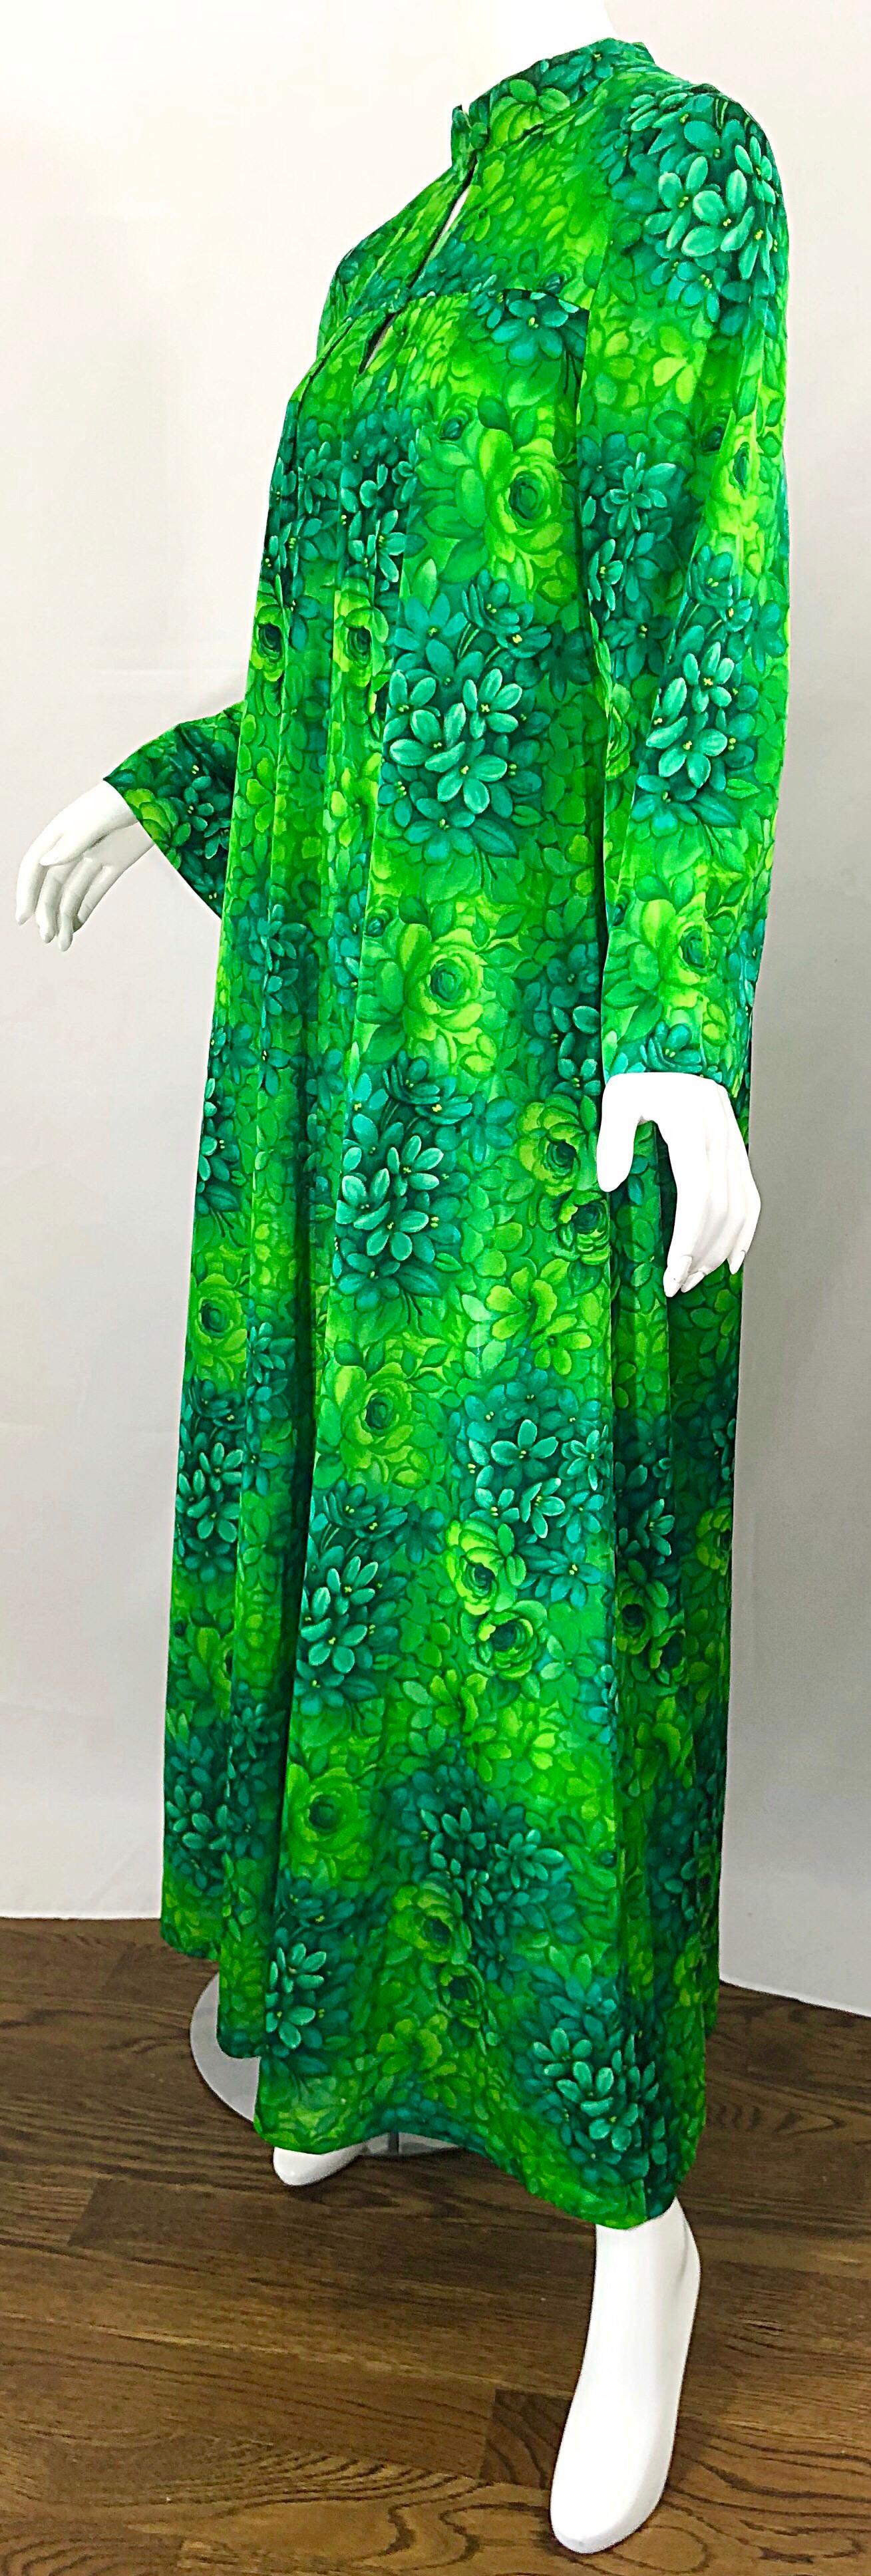 Amazing 1970s Neon + Kelly Green Abstract Flower Print 70s Vintage Caftan Dress 7